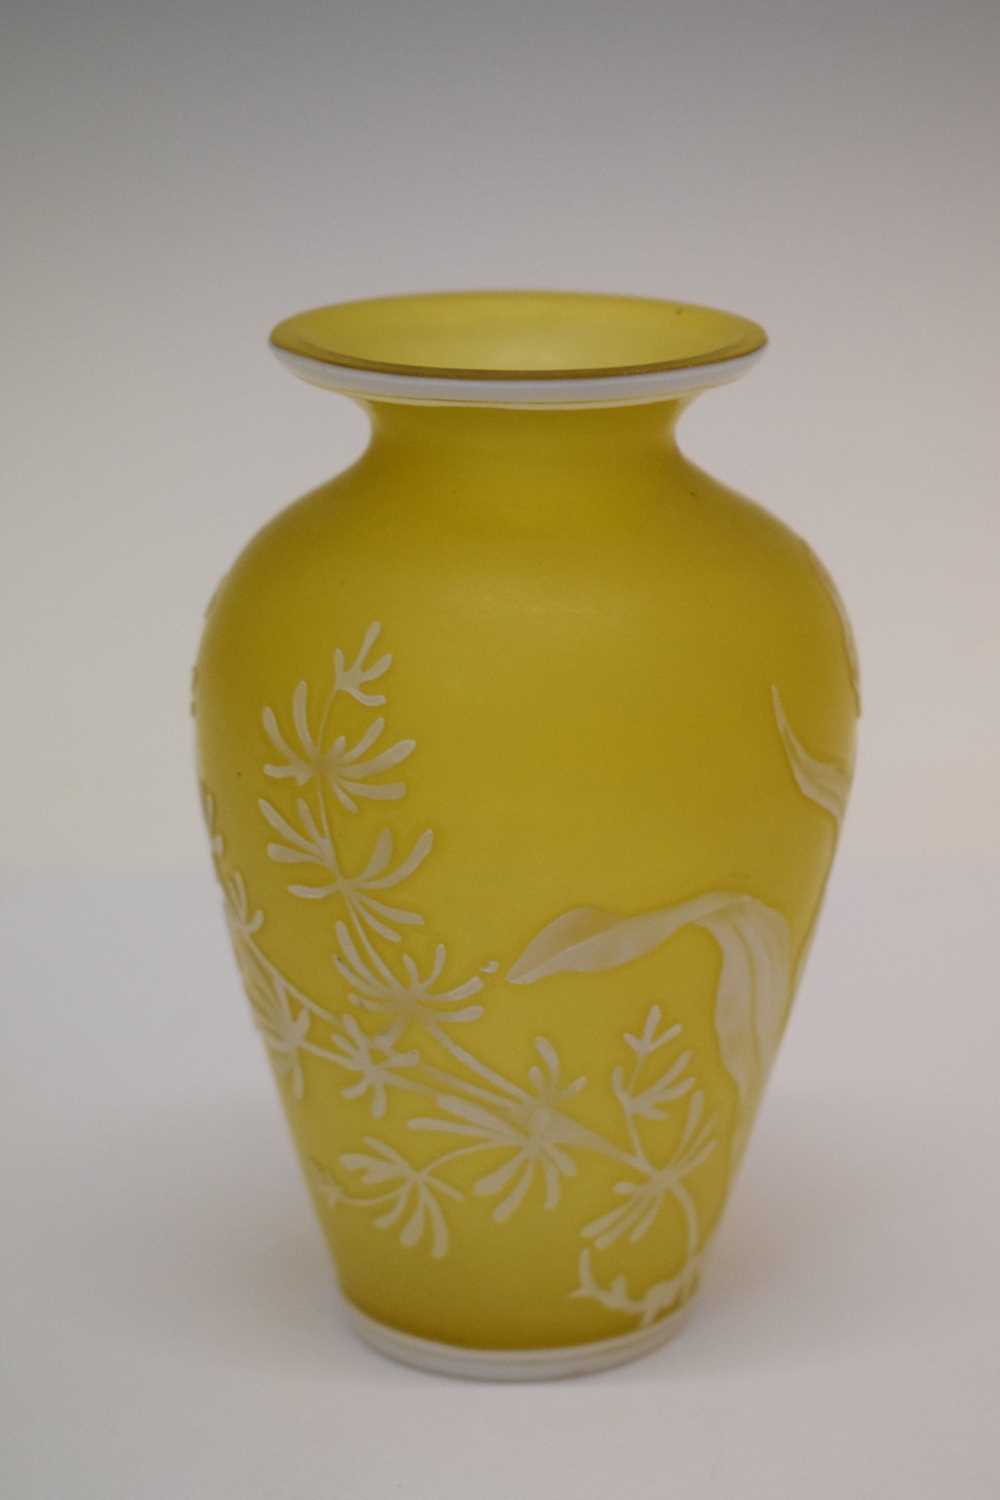 Galle style cameo glass vase with floral decoration - Image 2 of 6